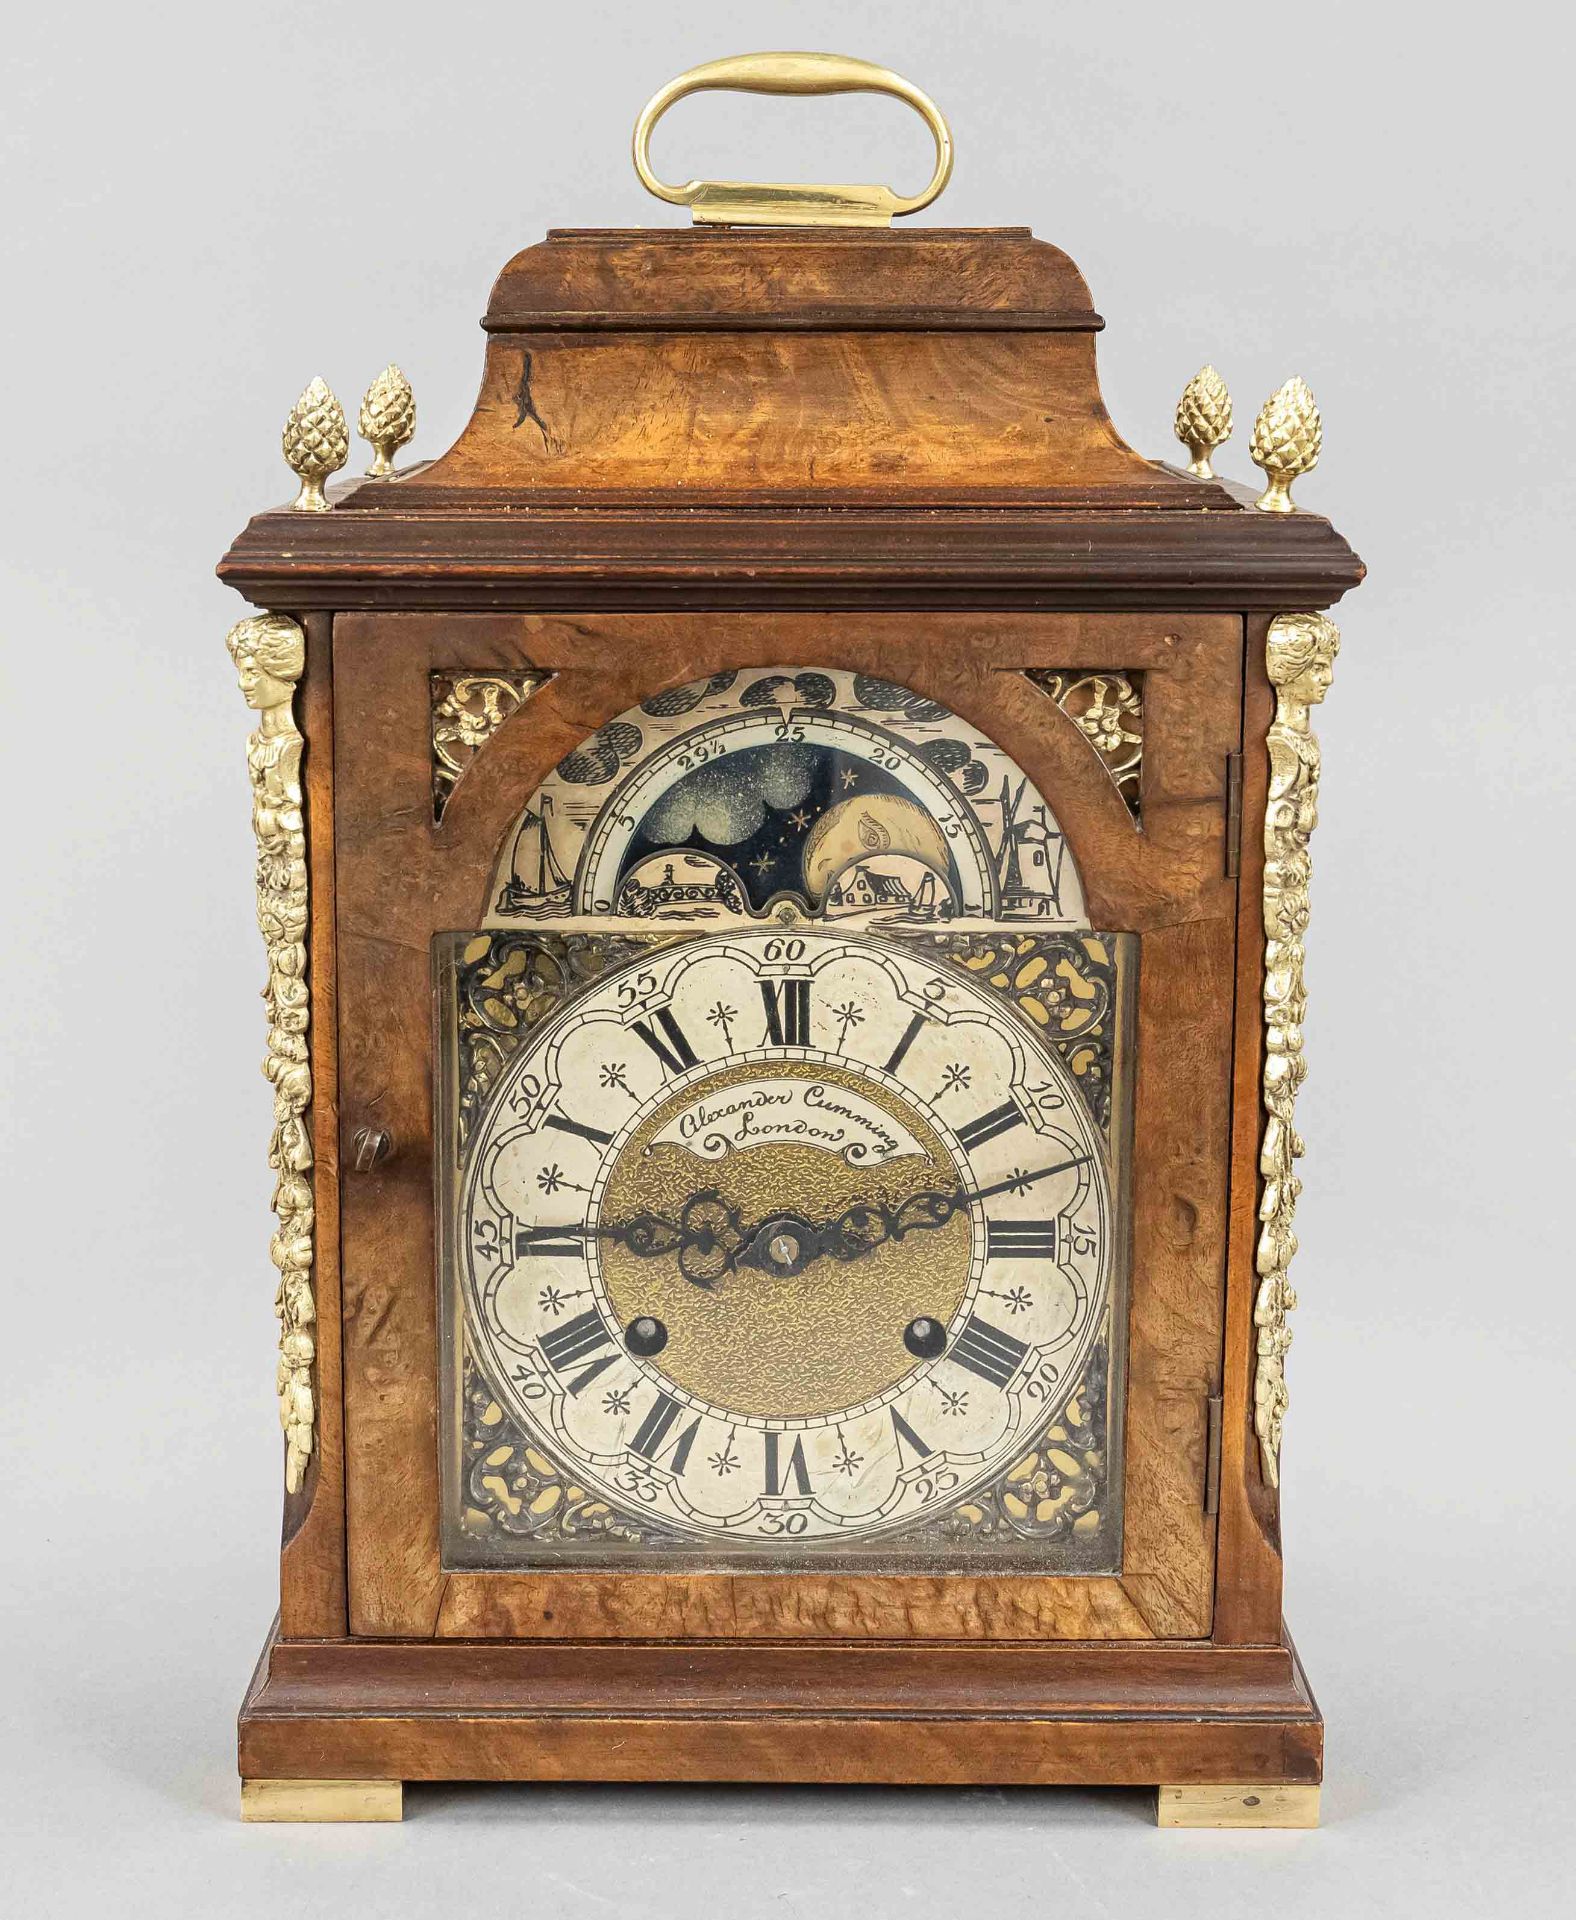 Table clock marked Alexander Cumming London, 2nd half of 19th c., burl wood, floral engraved brass